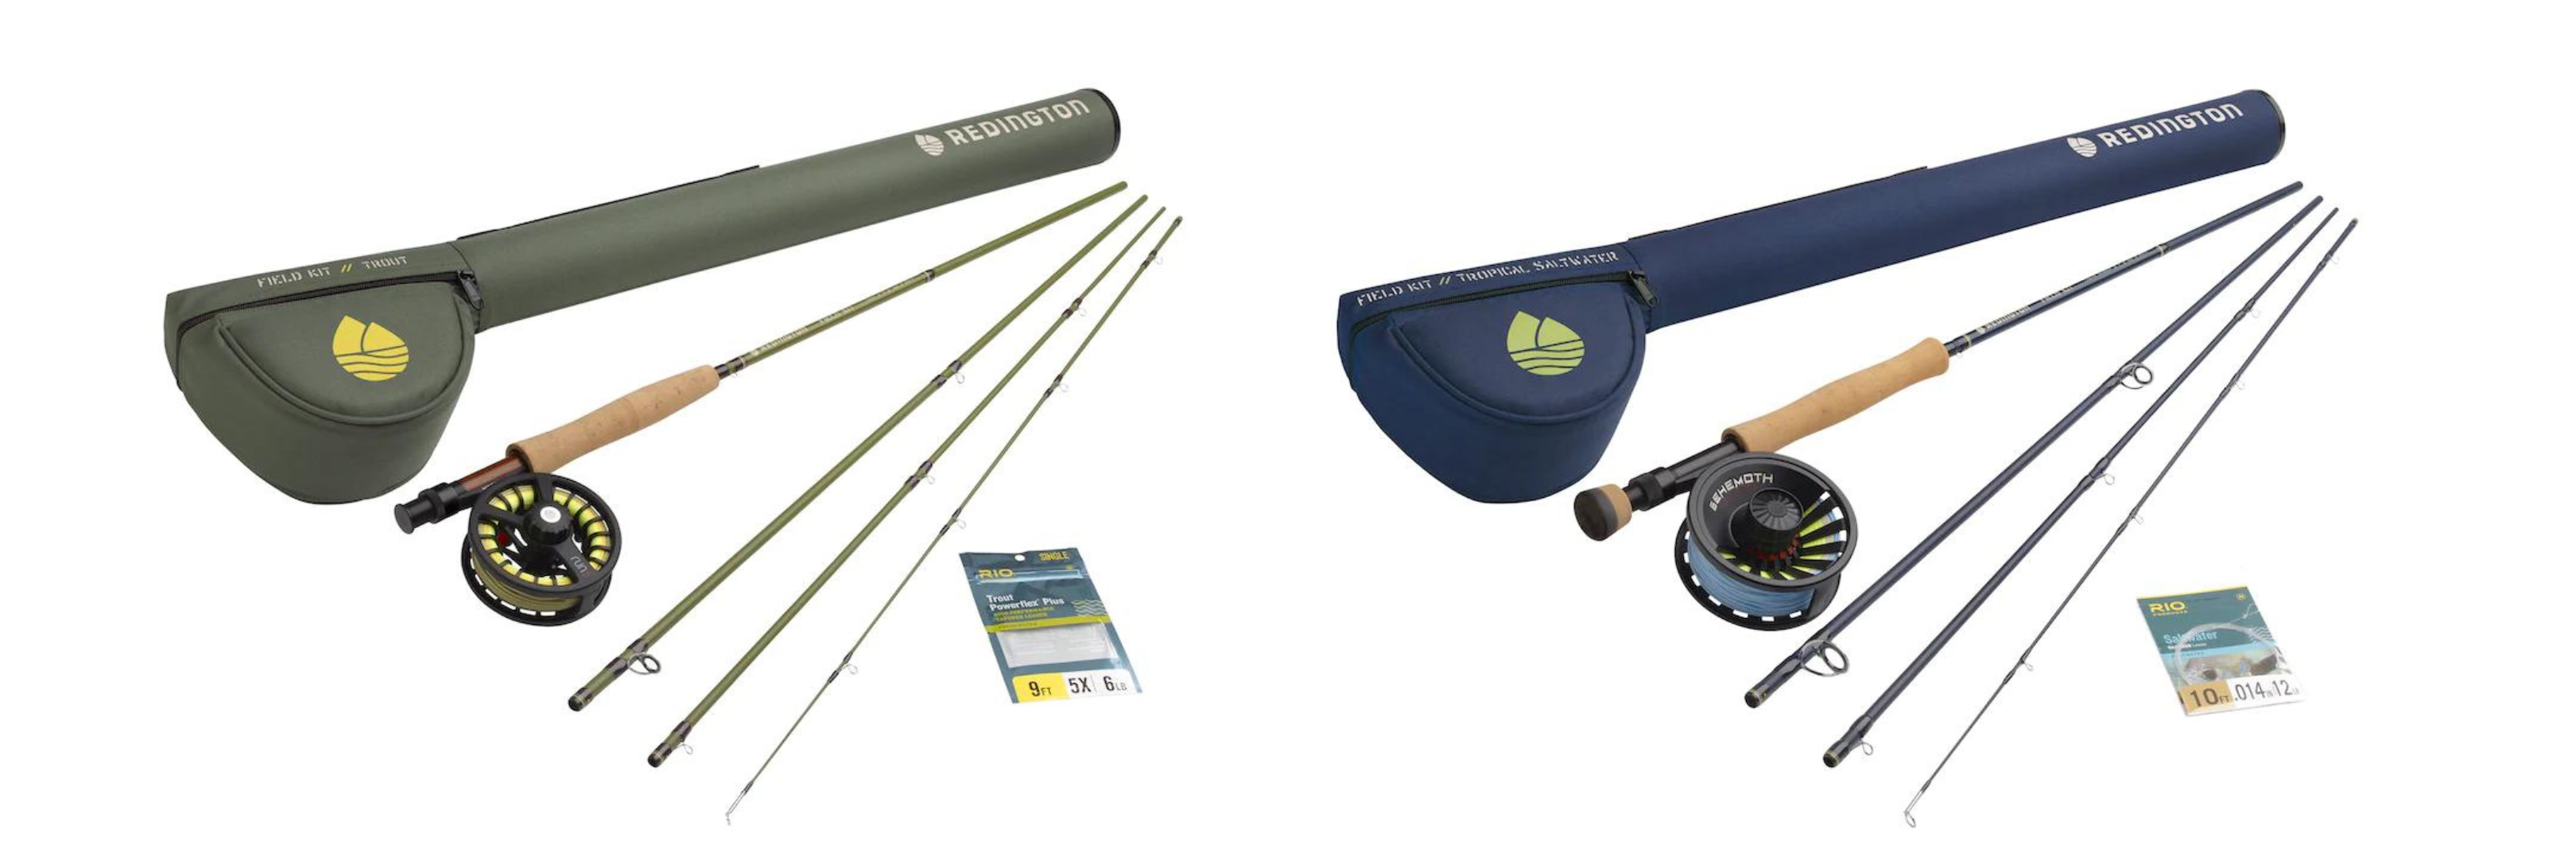 Timber Hawk Fly Fishing Combo Outfit - Under $100